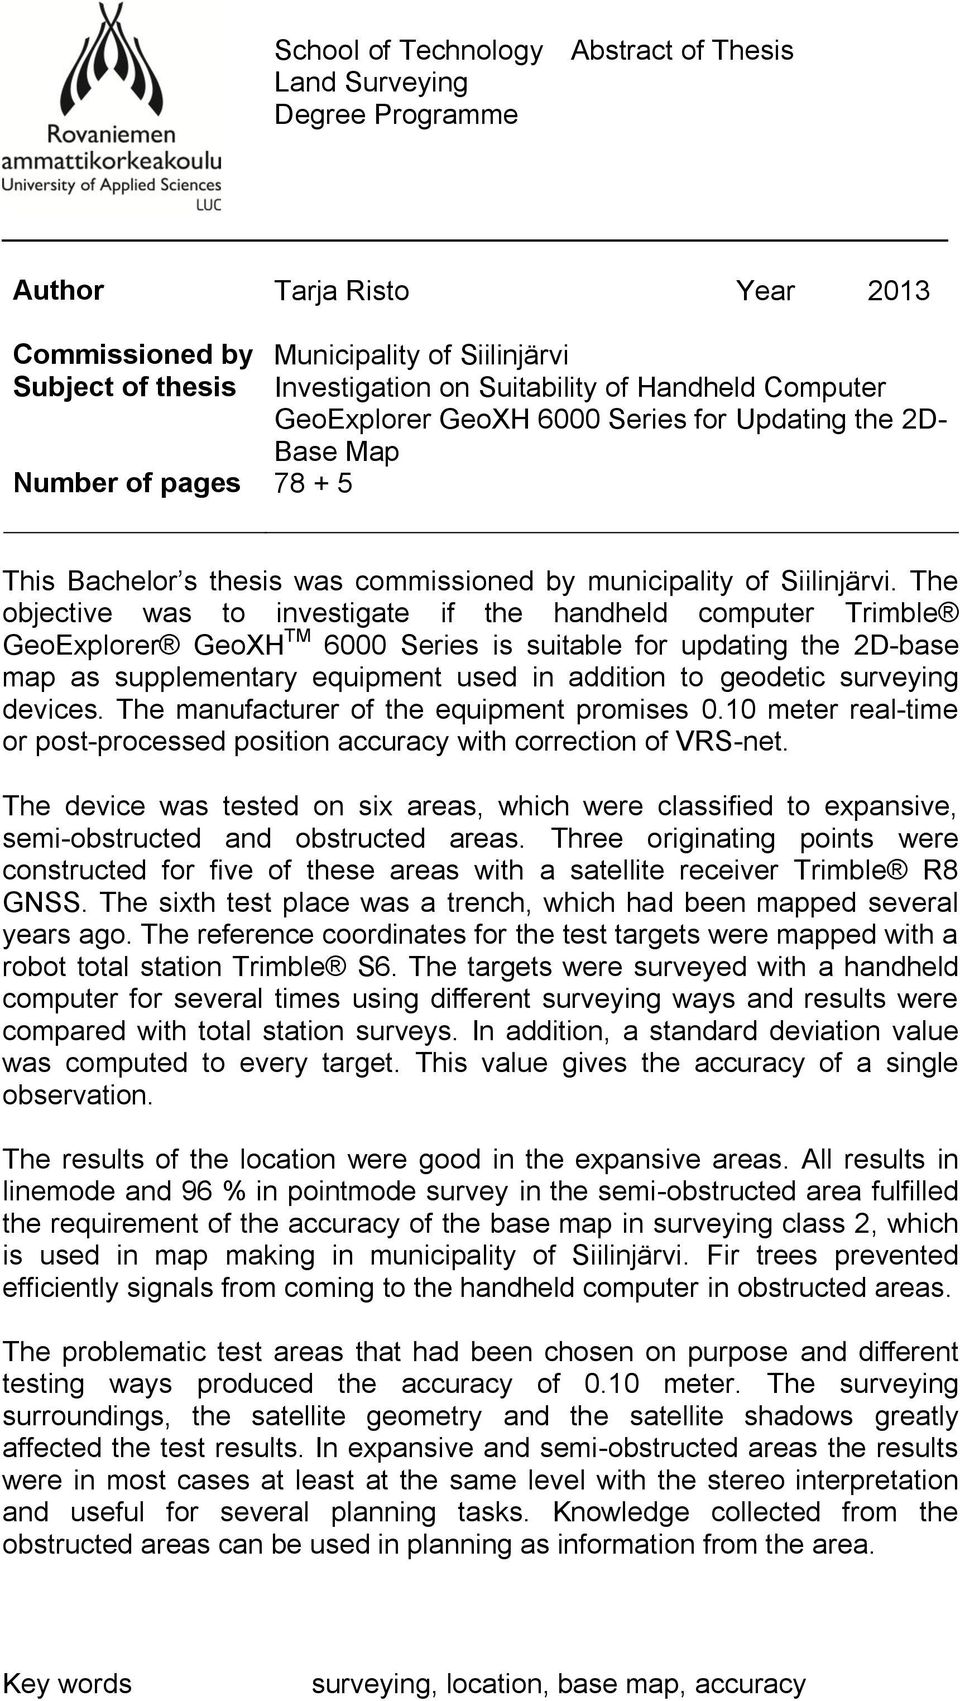 The objective was to investigate if the handheld computer Trimble GeoExplorer GeoXH TM 6000 Series is suitable for updating the 2D-base map as supplementary equipment used in addition to geodetic